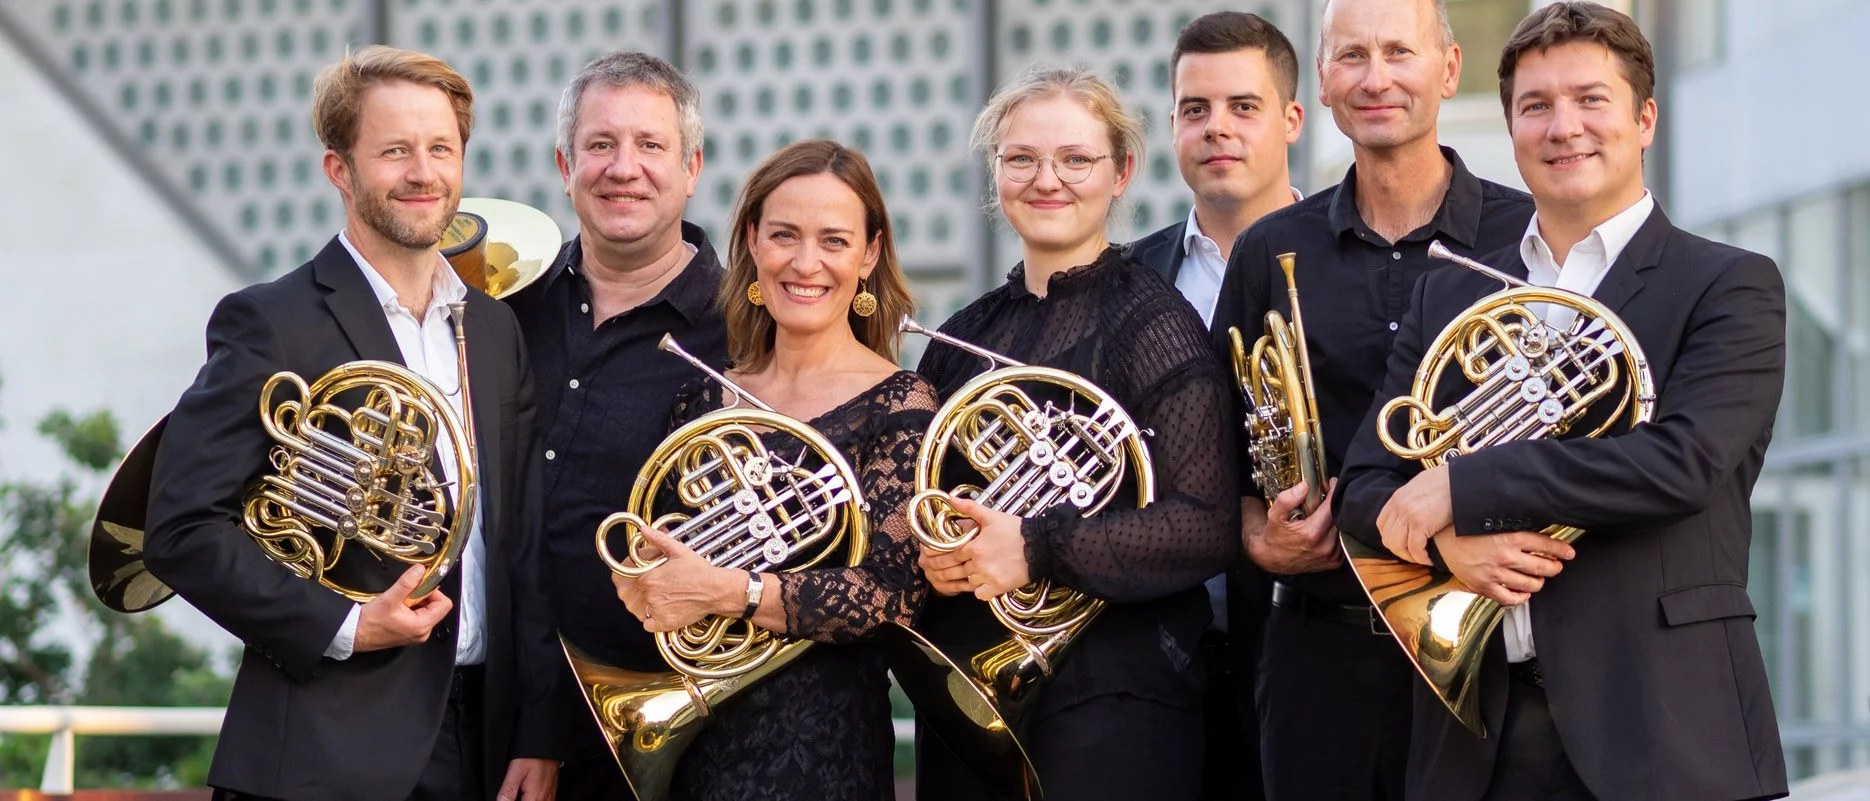 Group photo with seven horn players